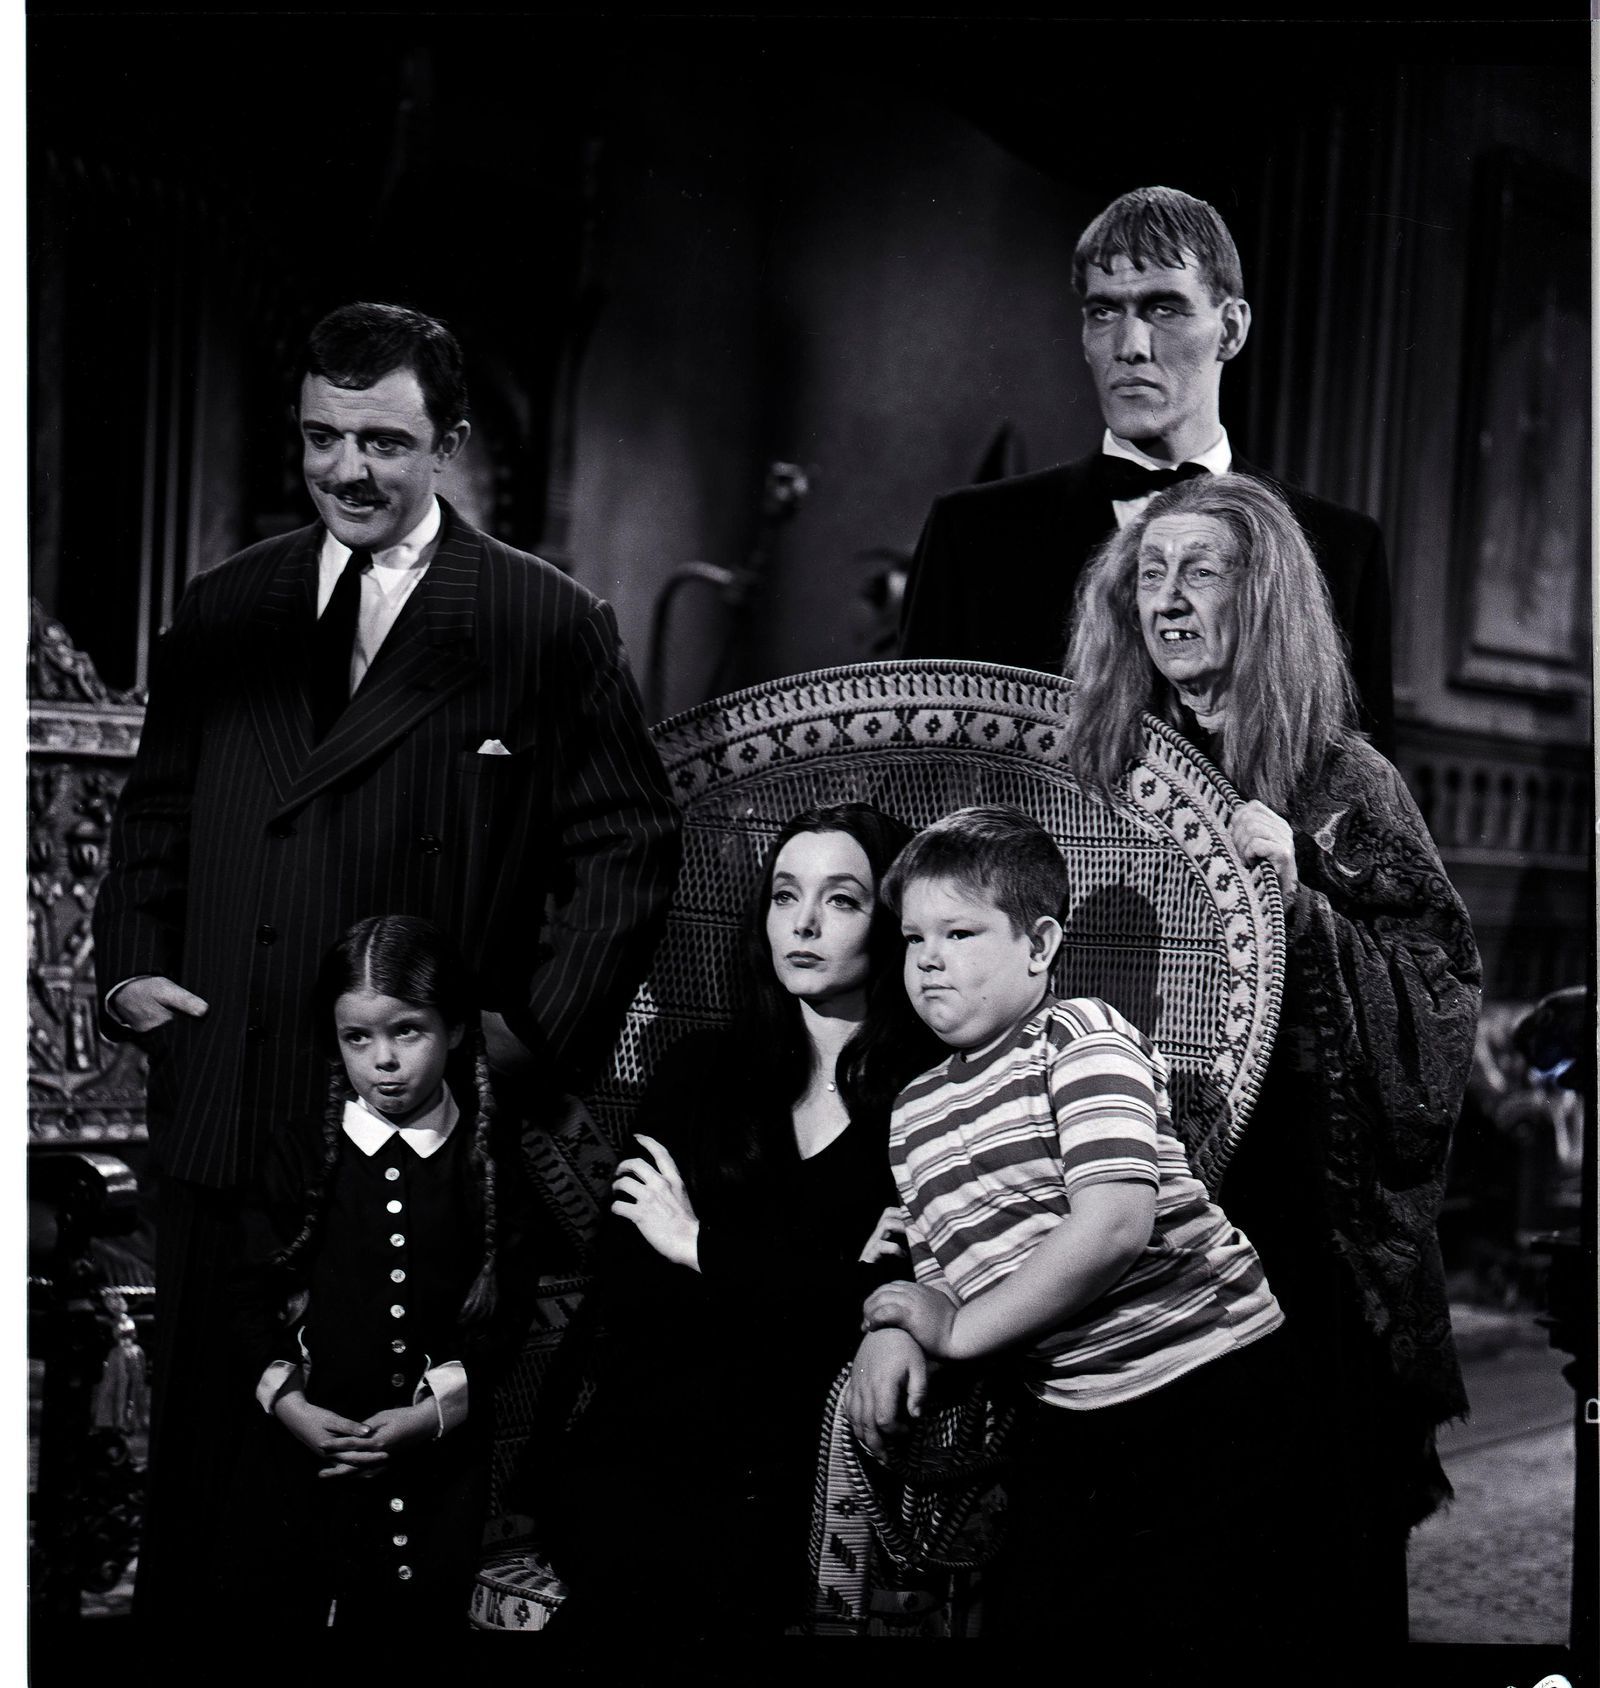 The Cultural History of 'The Addams Family'. Arts & Culture